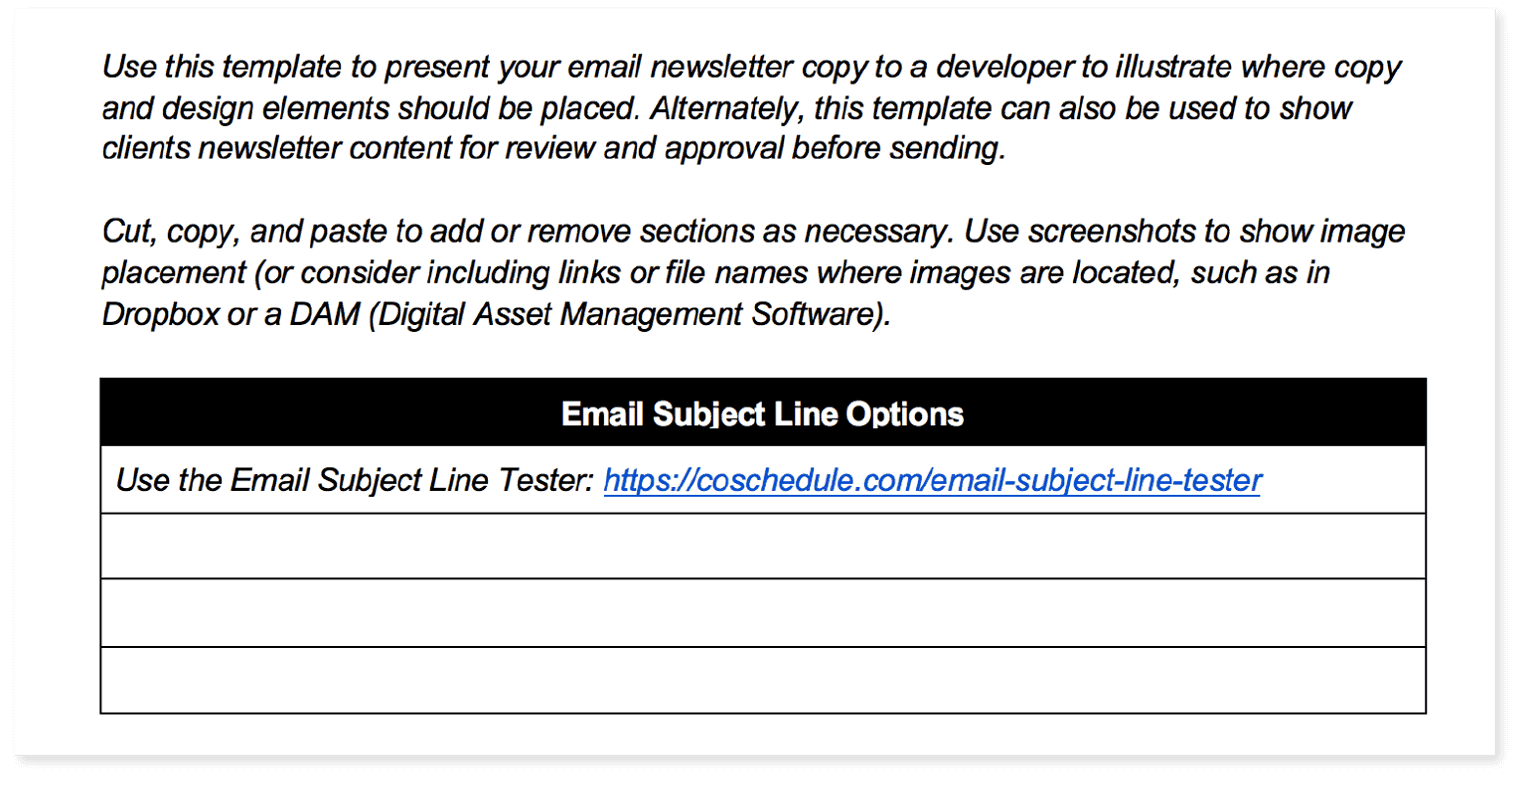 Example from the newsletter template